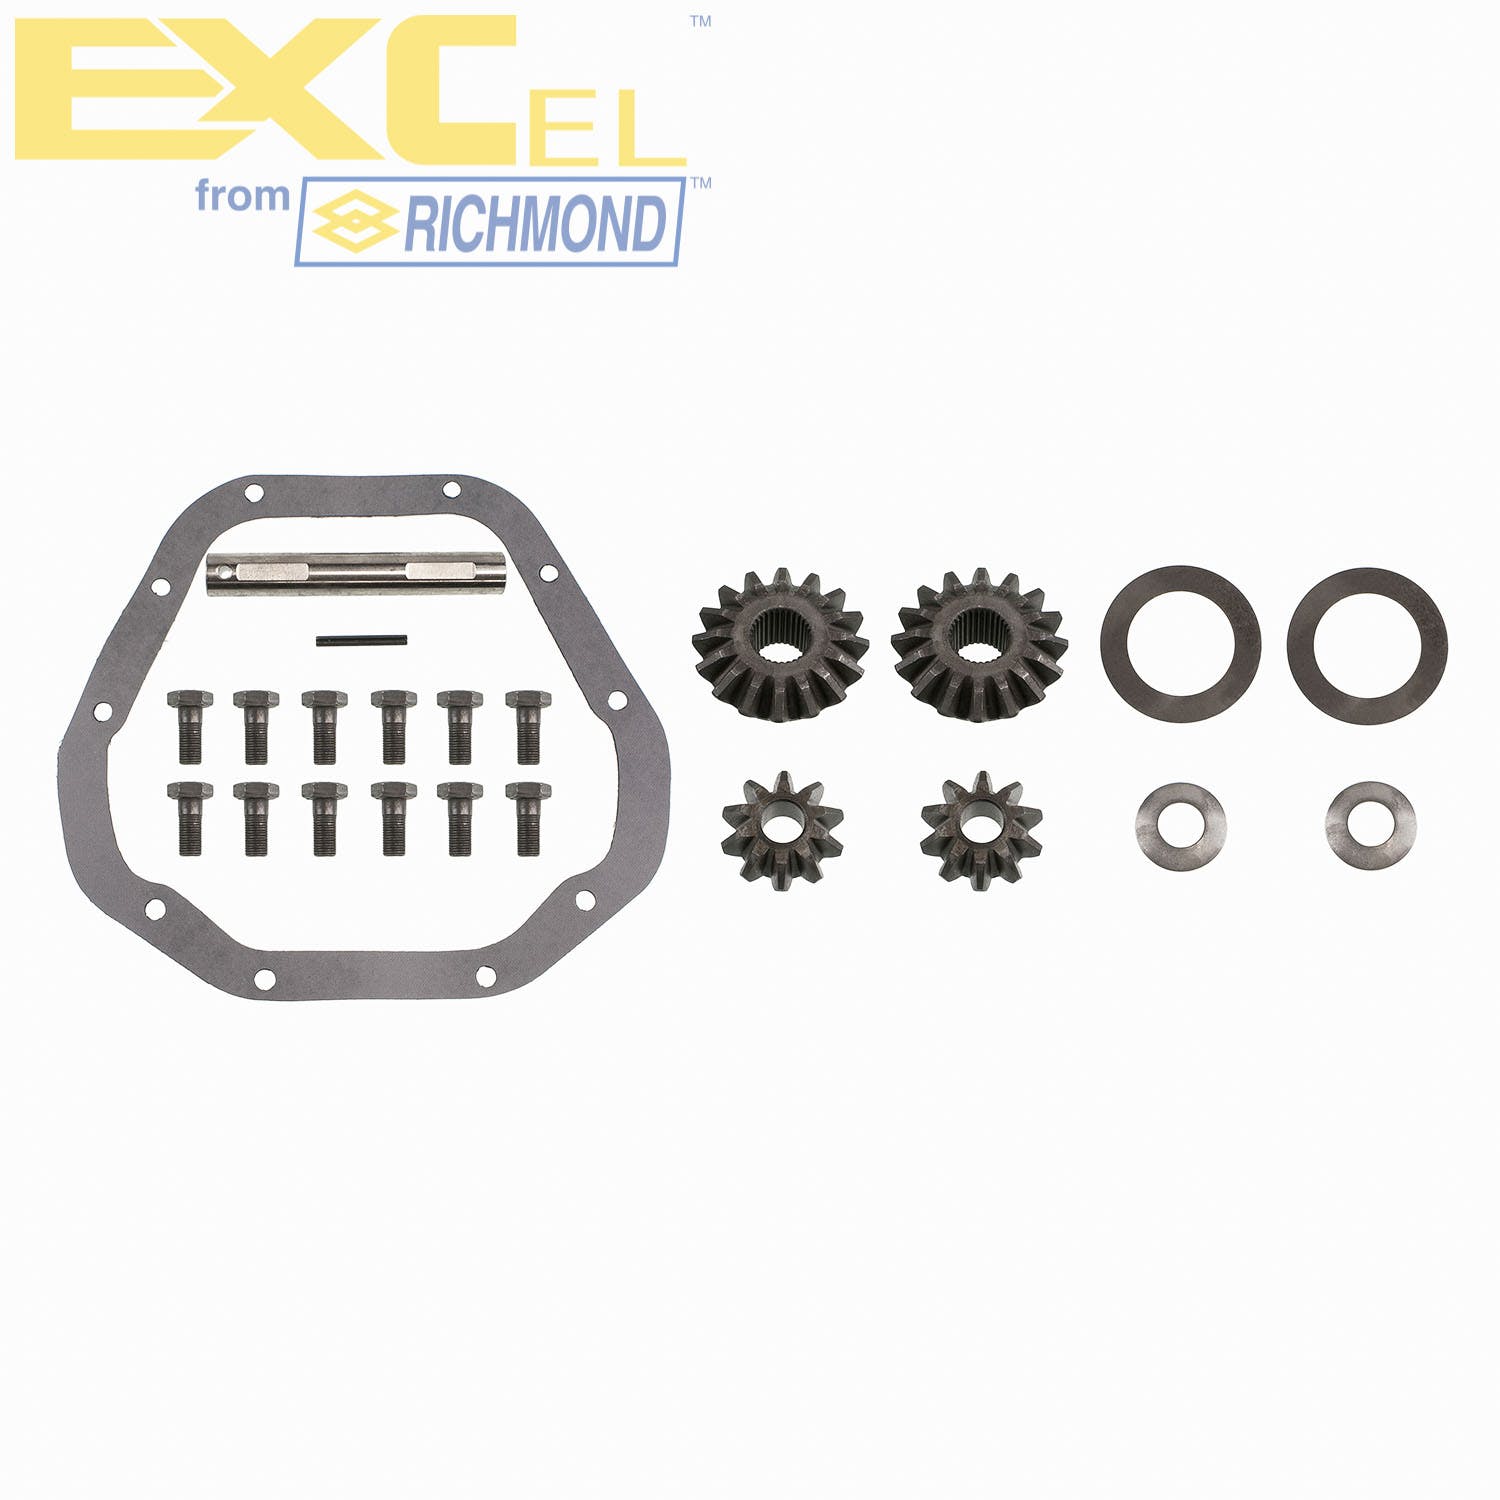 Excel XL-4072 Differential Carrier Gear Kit